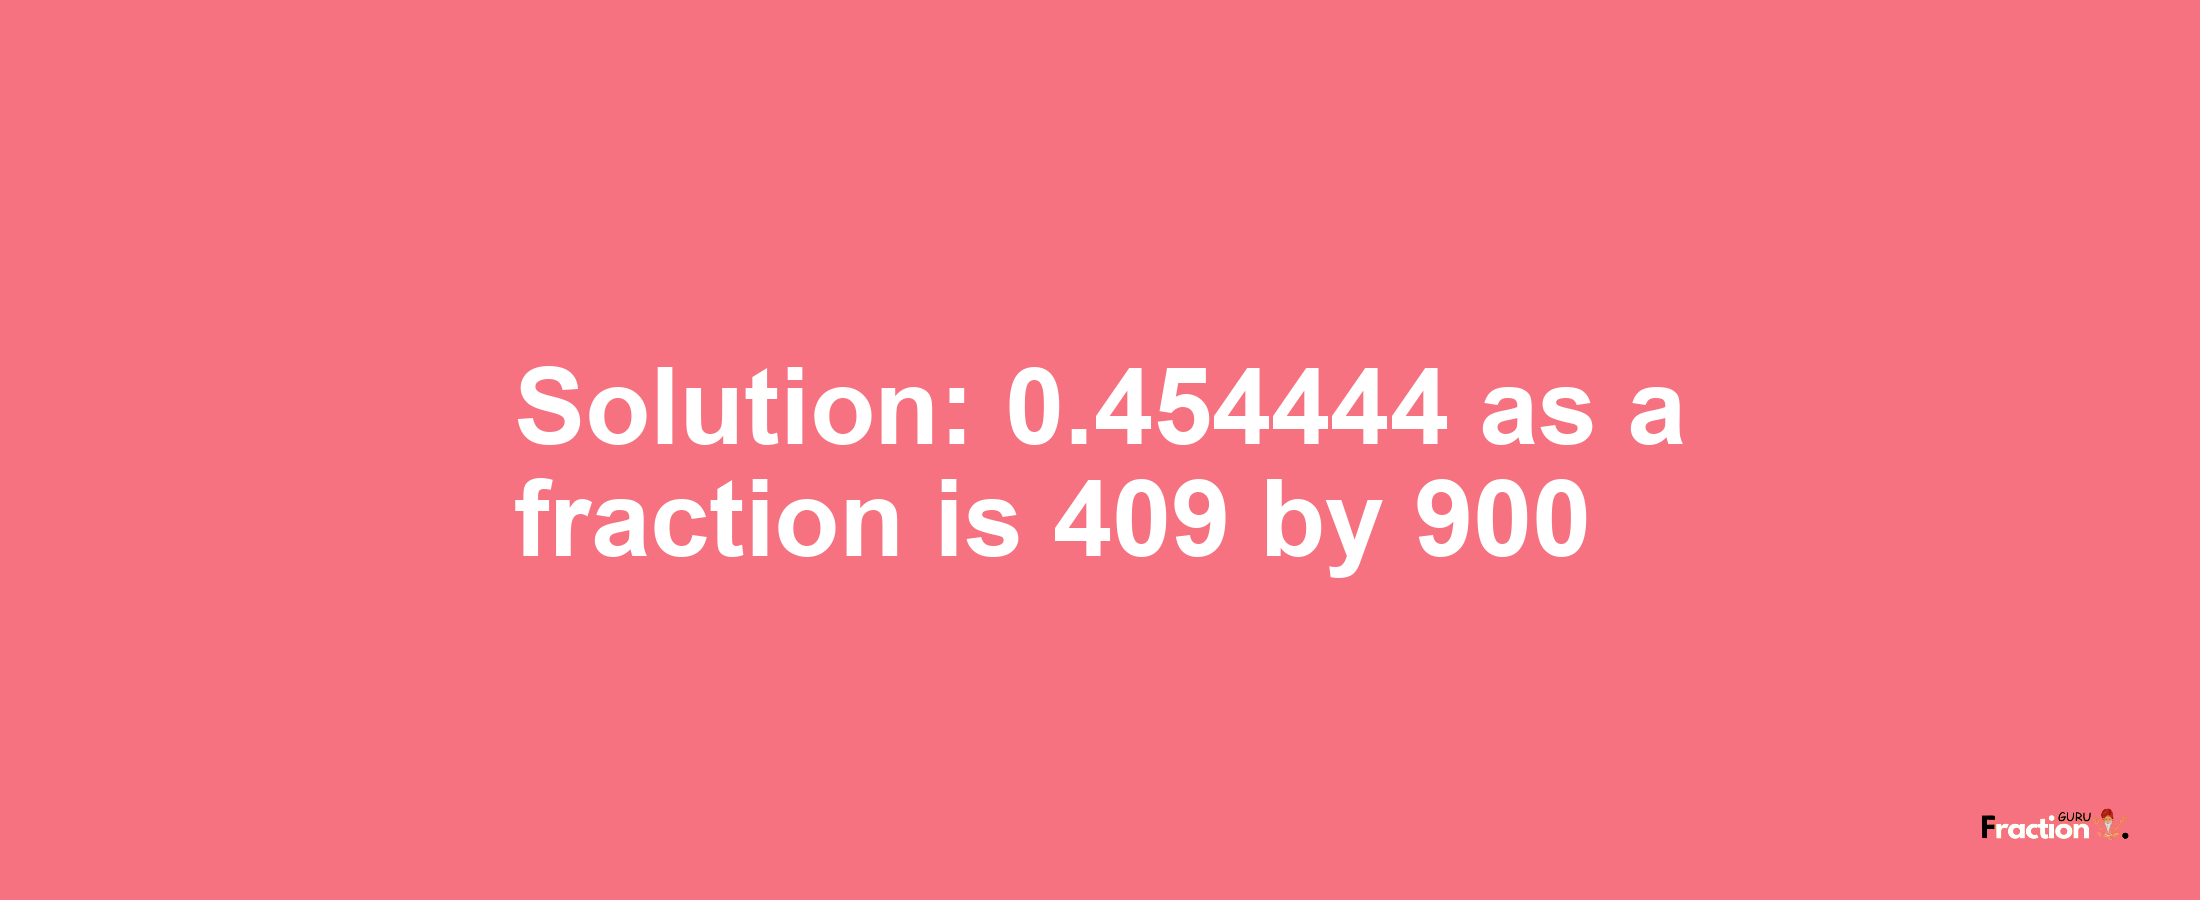 Solution:0.454444 as a fraction is 409/900